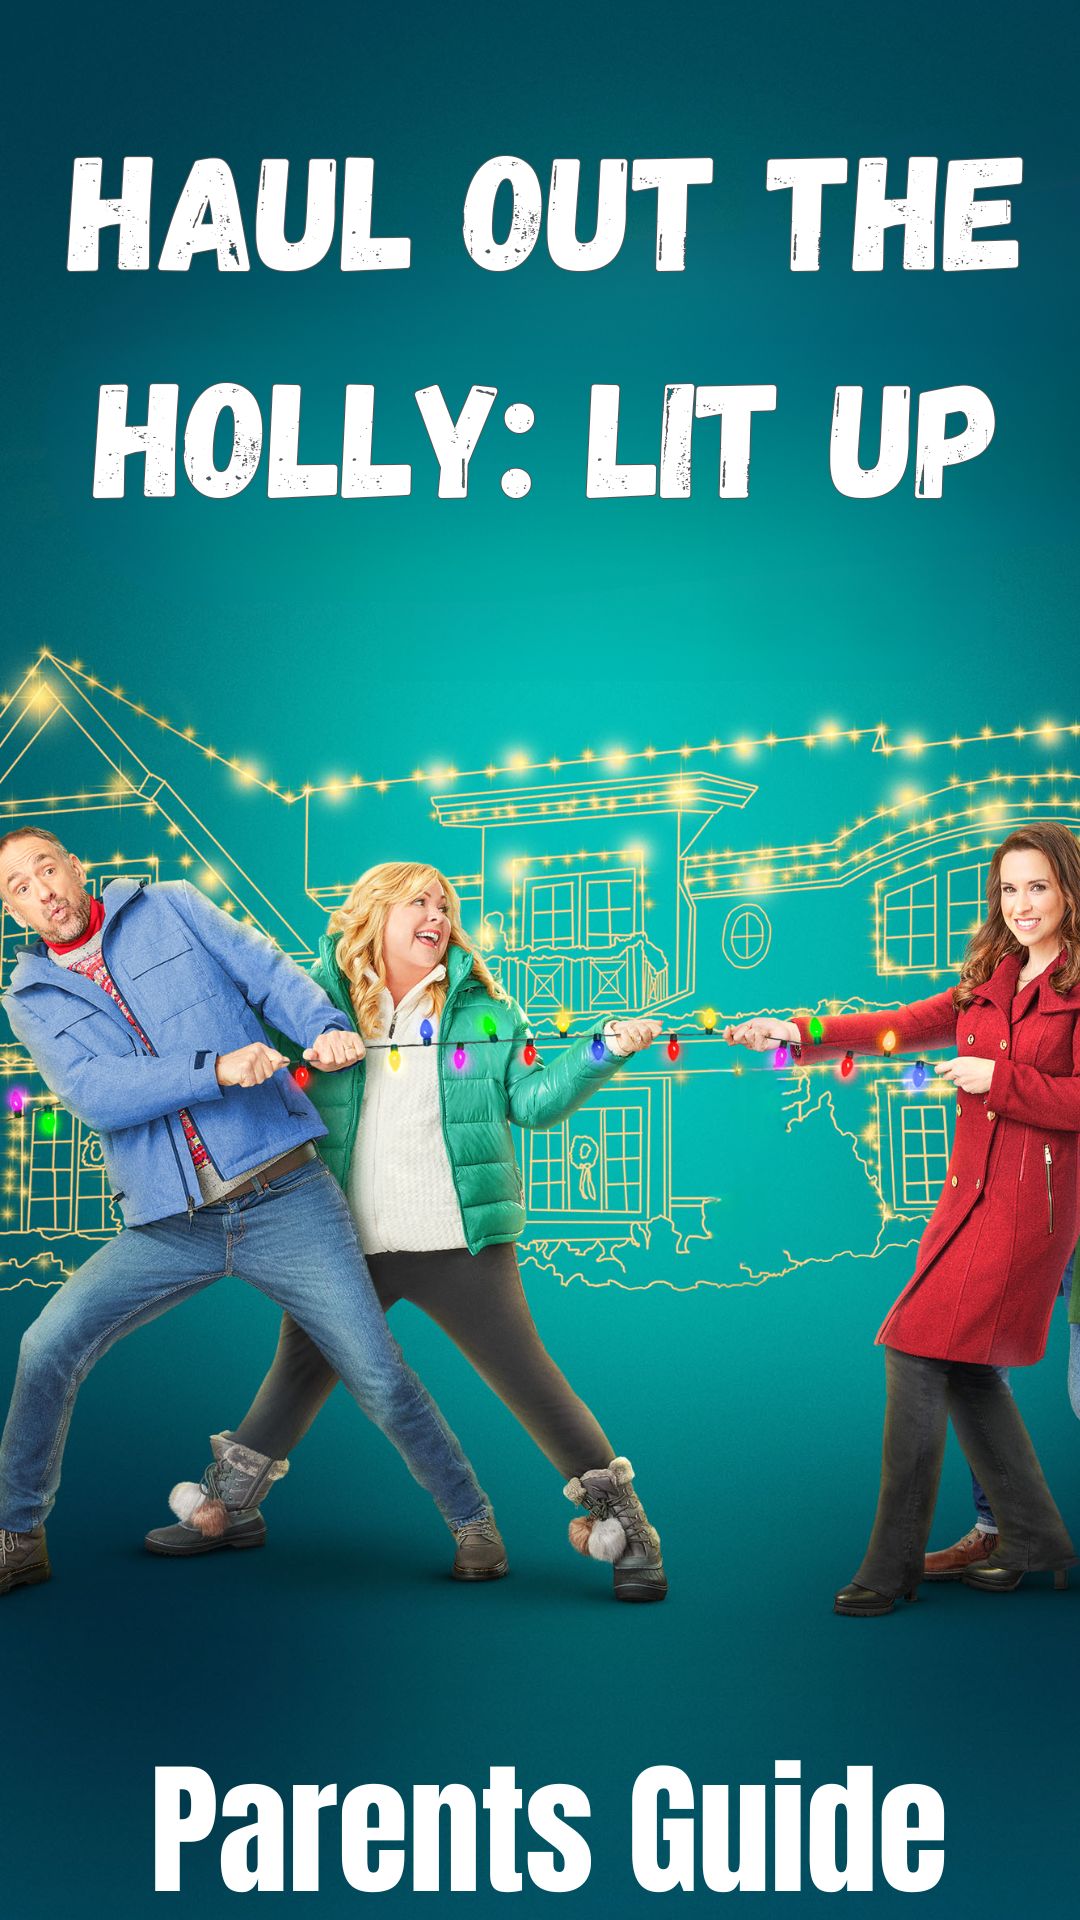 Haul out the Holly Lit Up Parents Guide (1)